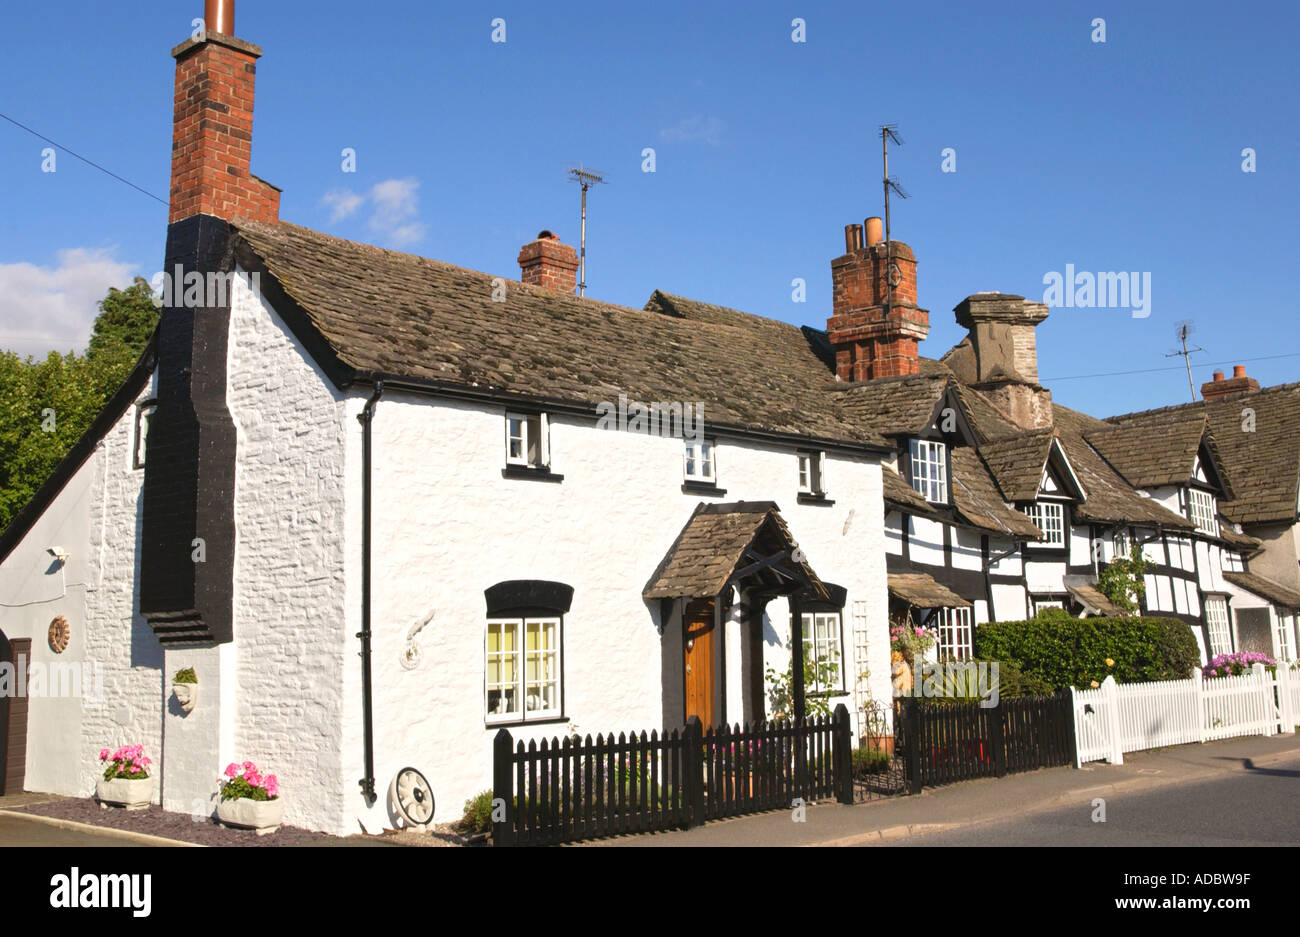 Detached cottage in the picturesque black and white village of Eardisley Herefordshire England UK Stock Photo